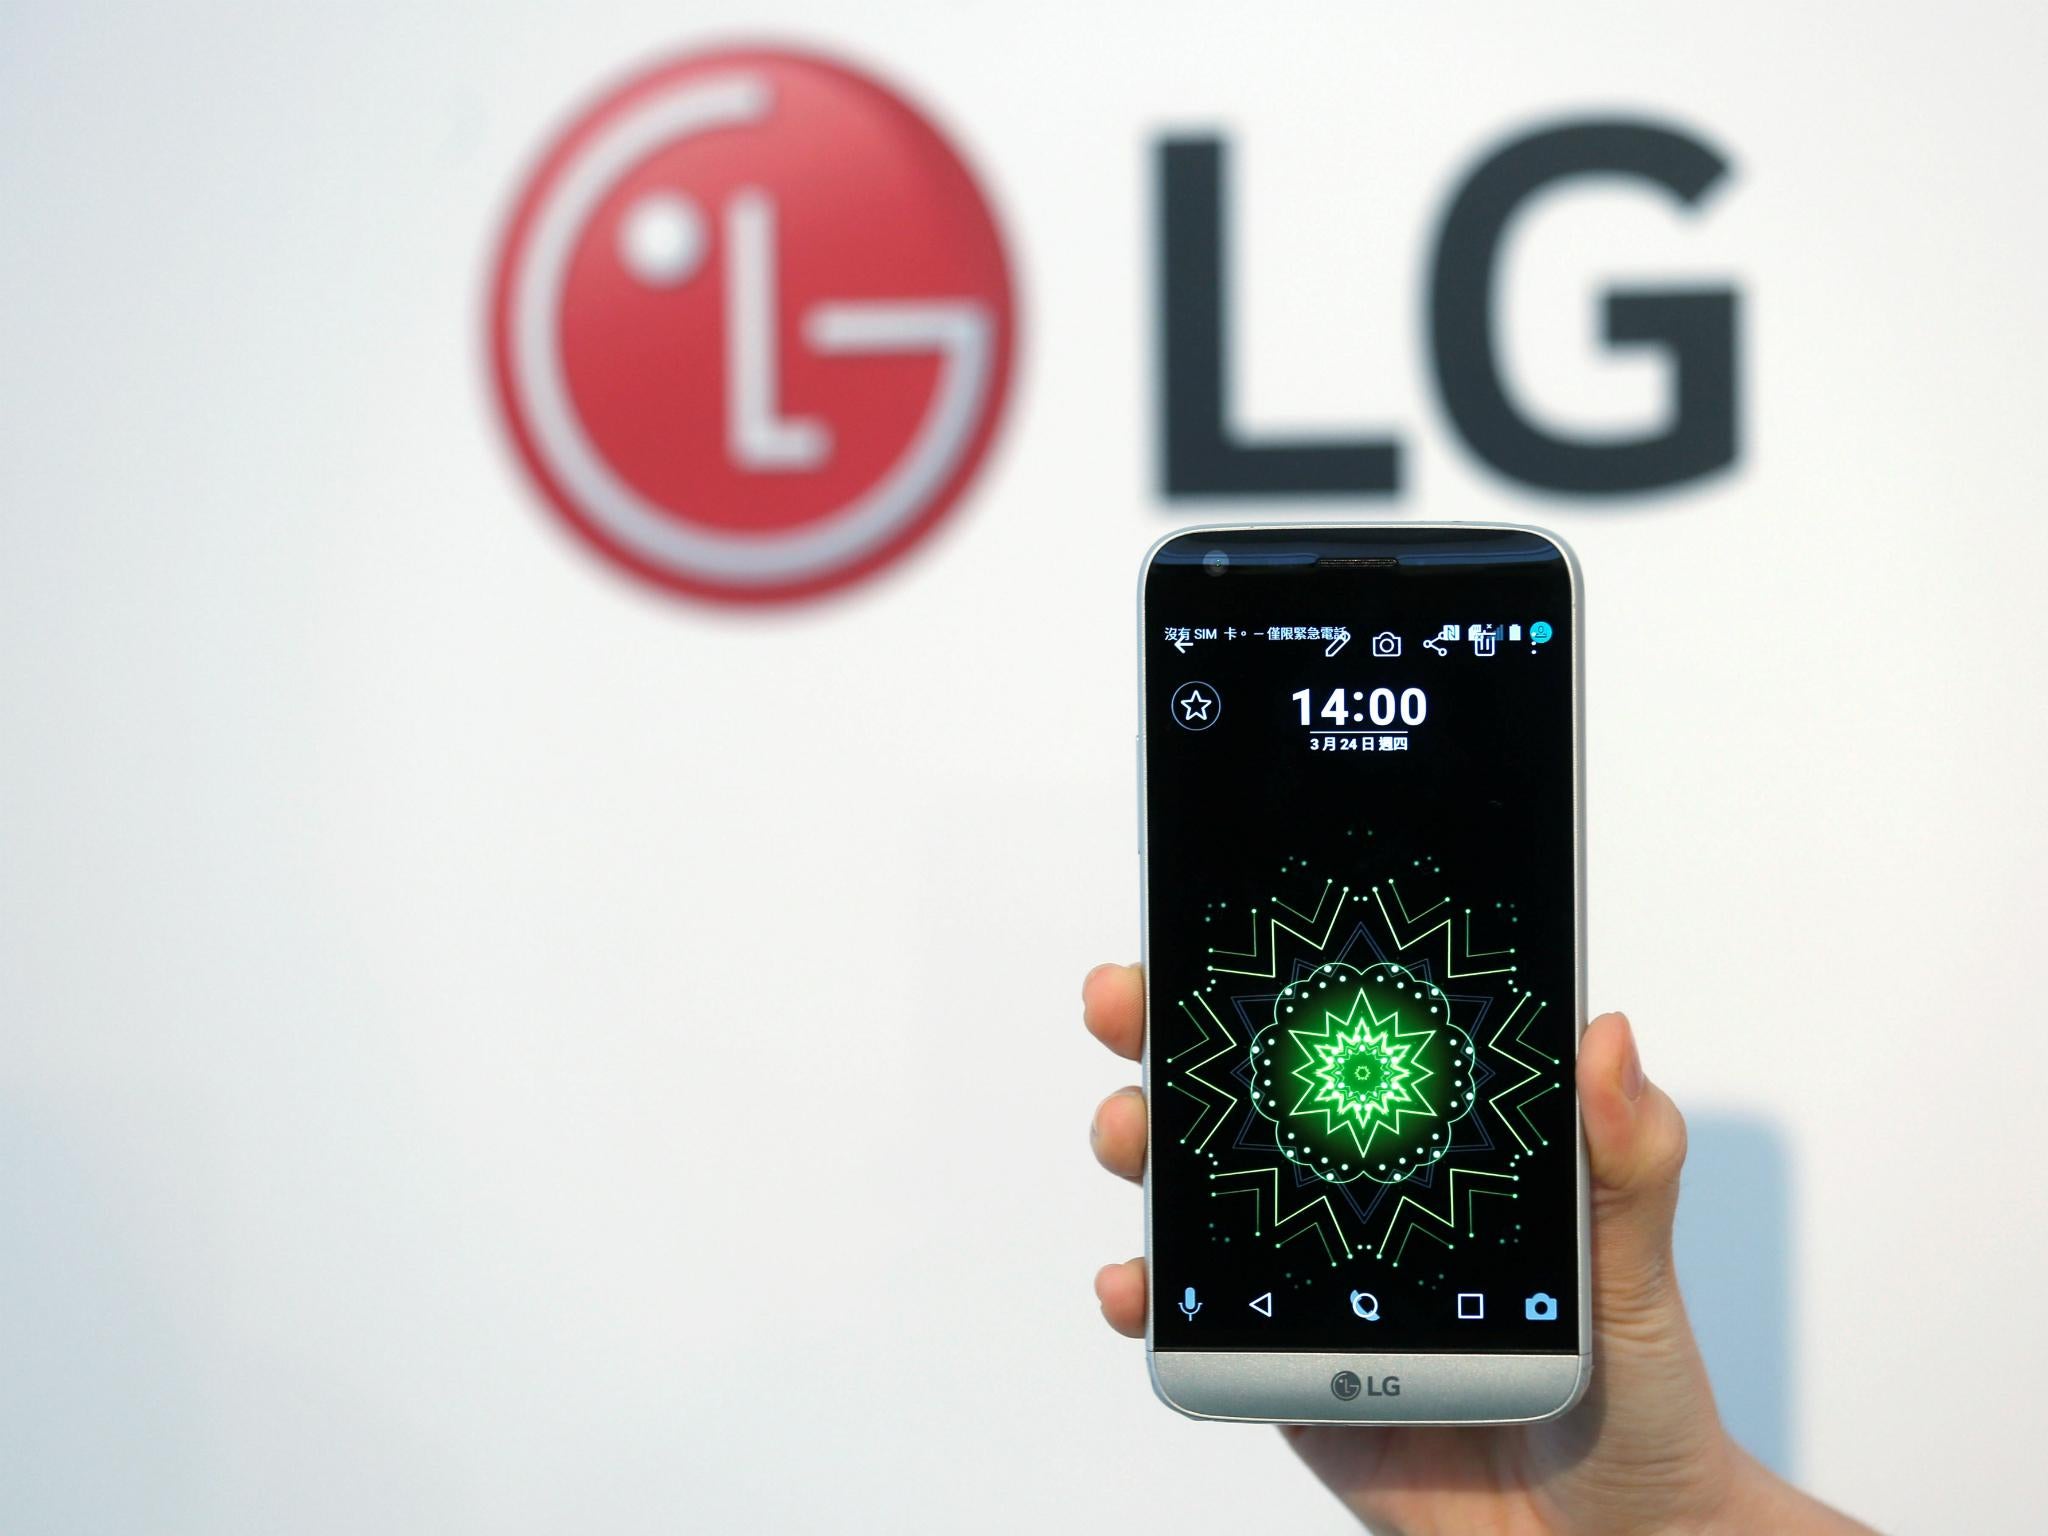 LG took an enormous risk with last year's modular G5, and it didn't pay off